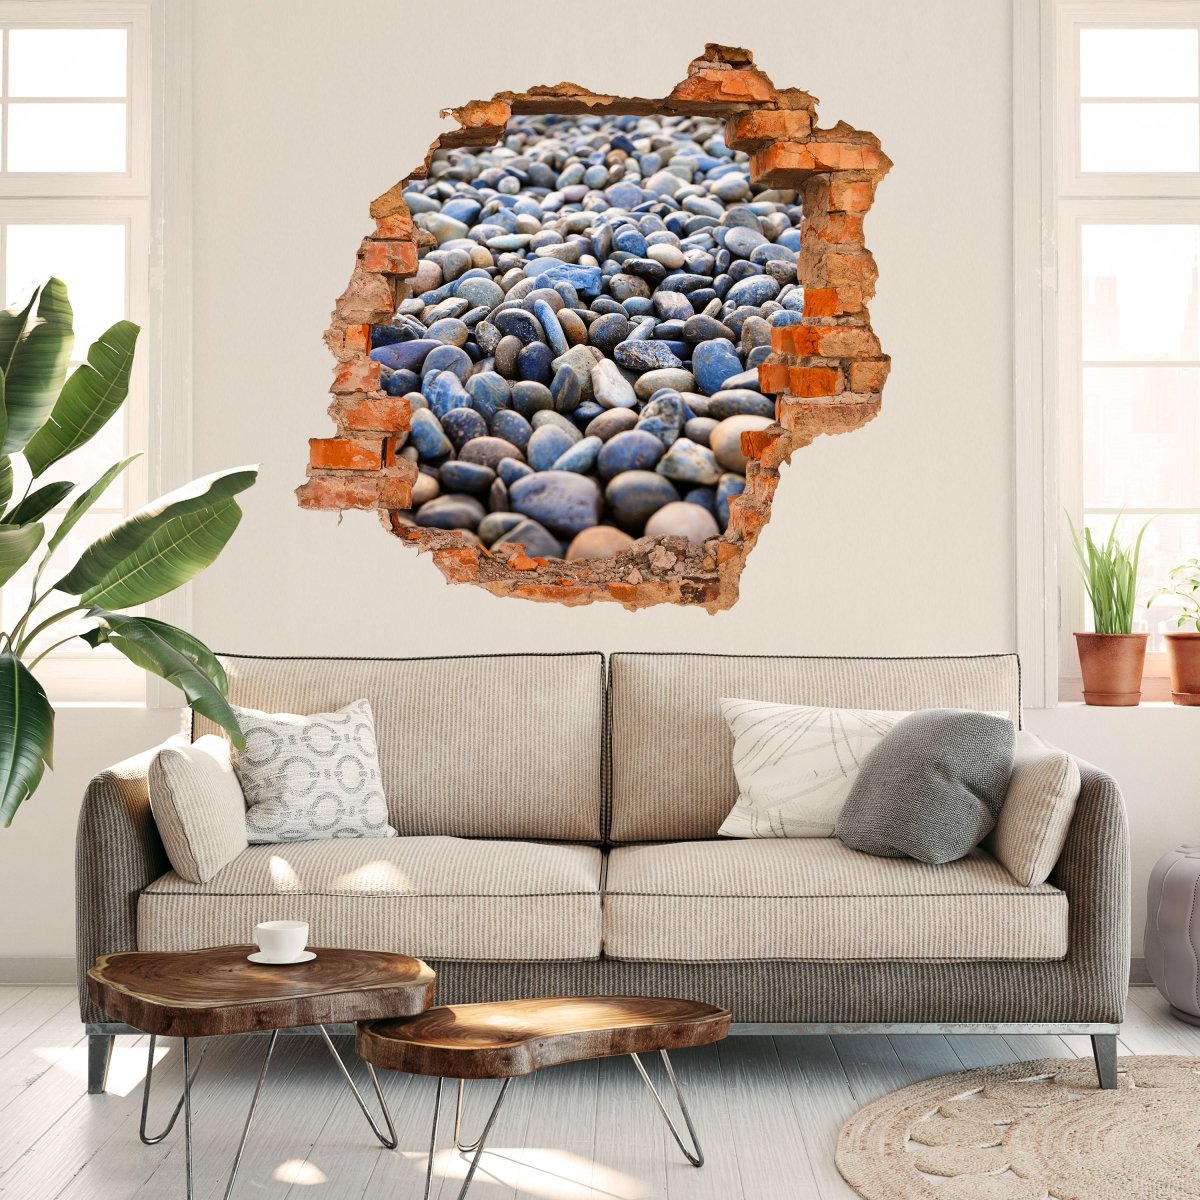 3D Wall Sticker Pile of Stones - Wall Decal M0711